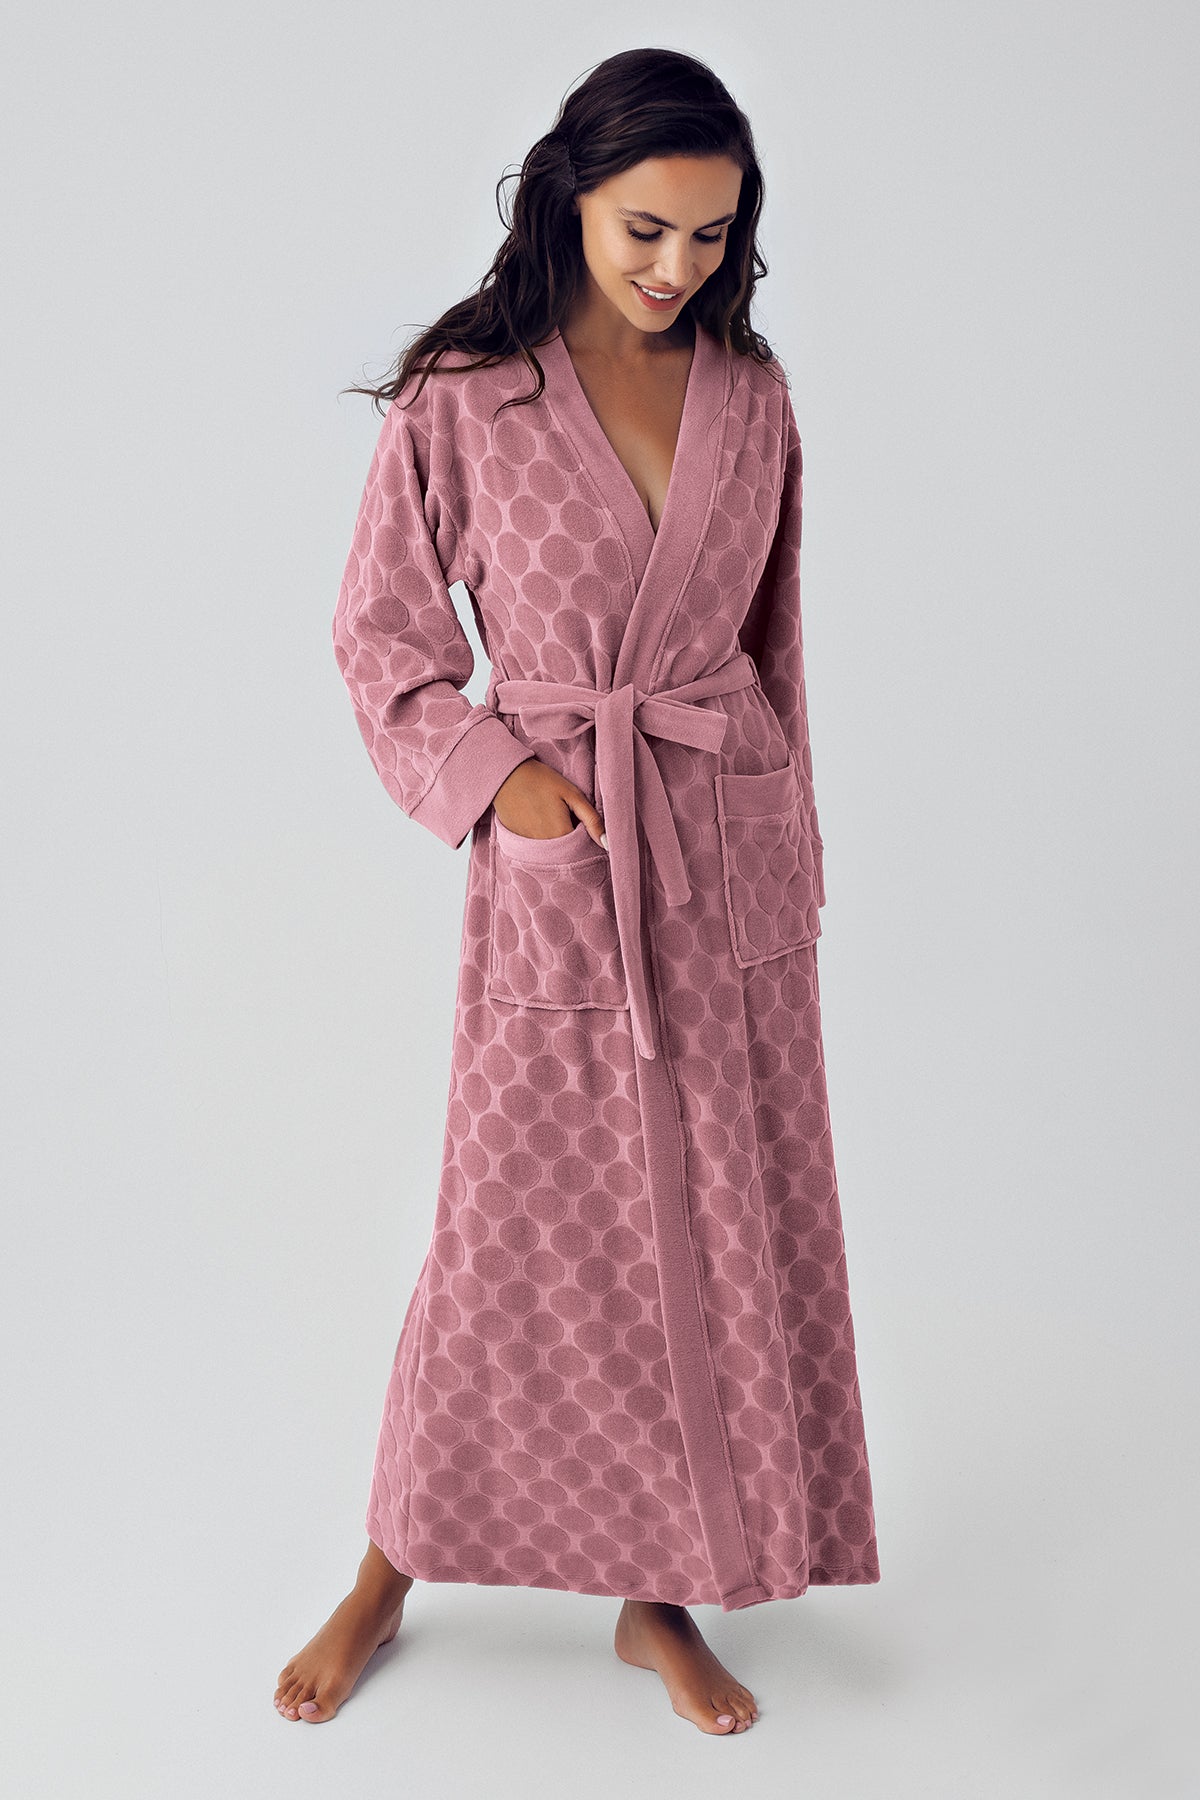 Shopymommy 500101 Terry Jacquard Maternity & Nursing Nightgown With Robe Dried Rose